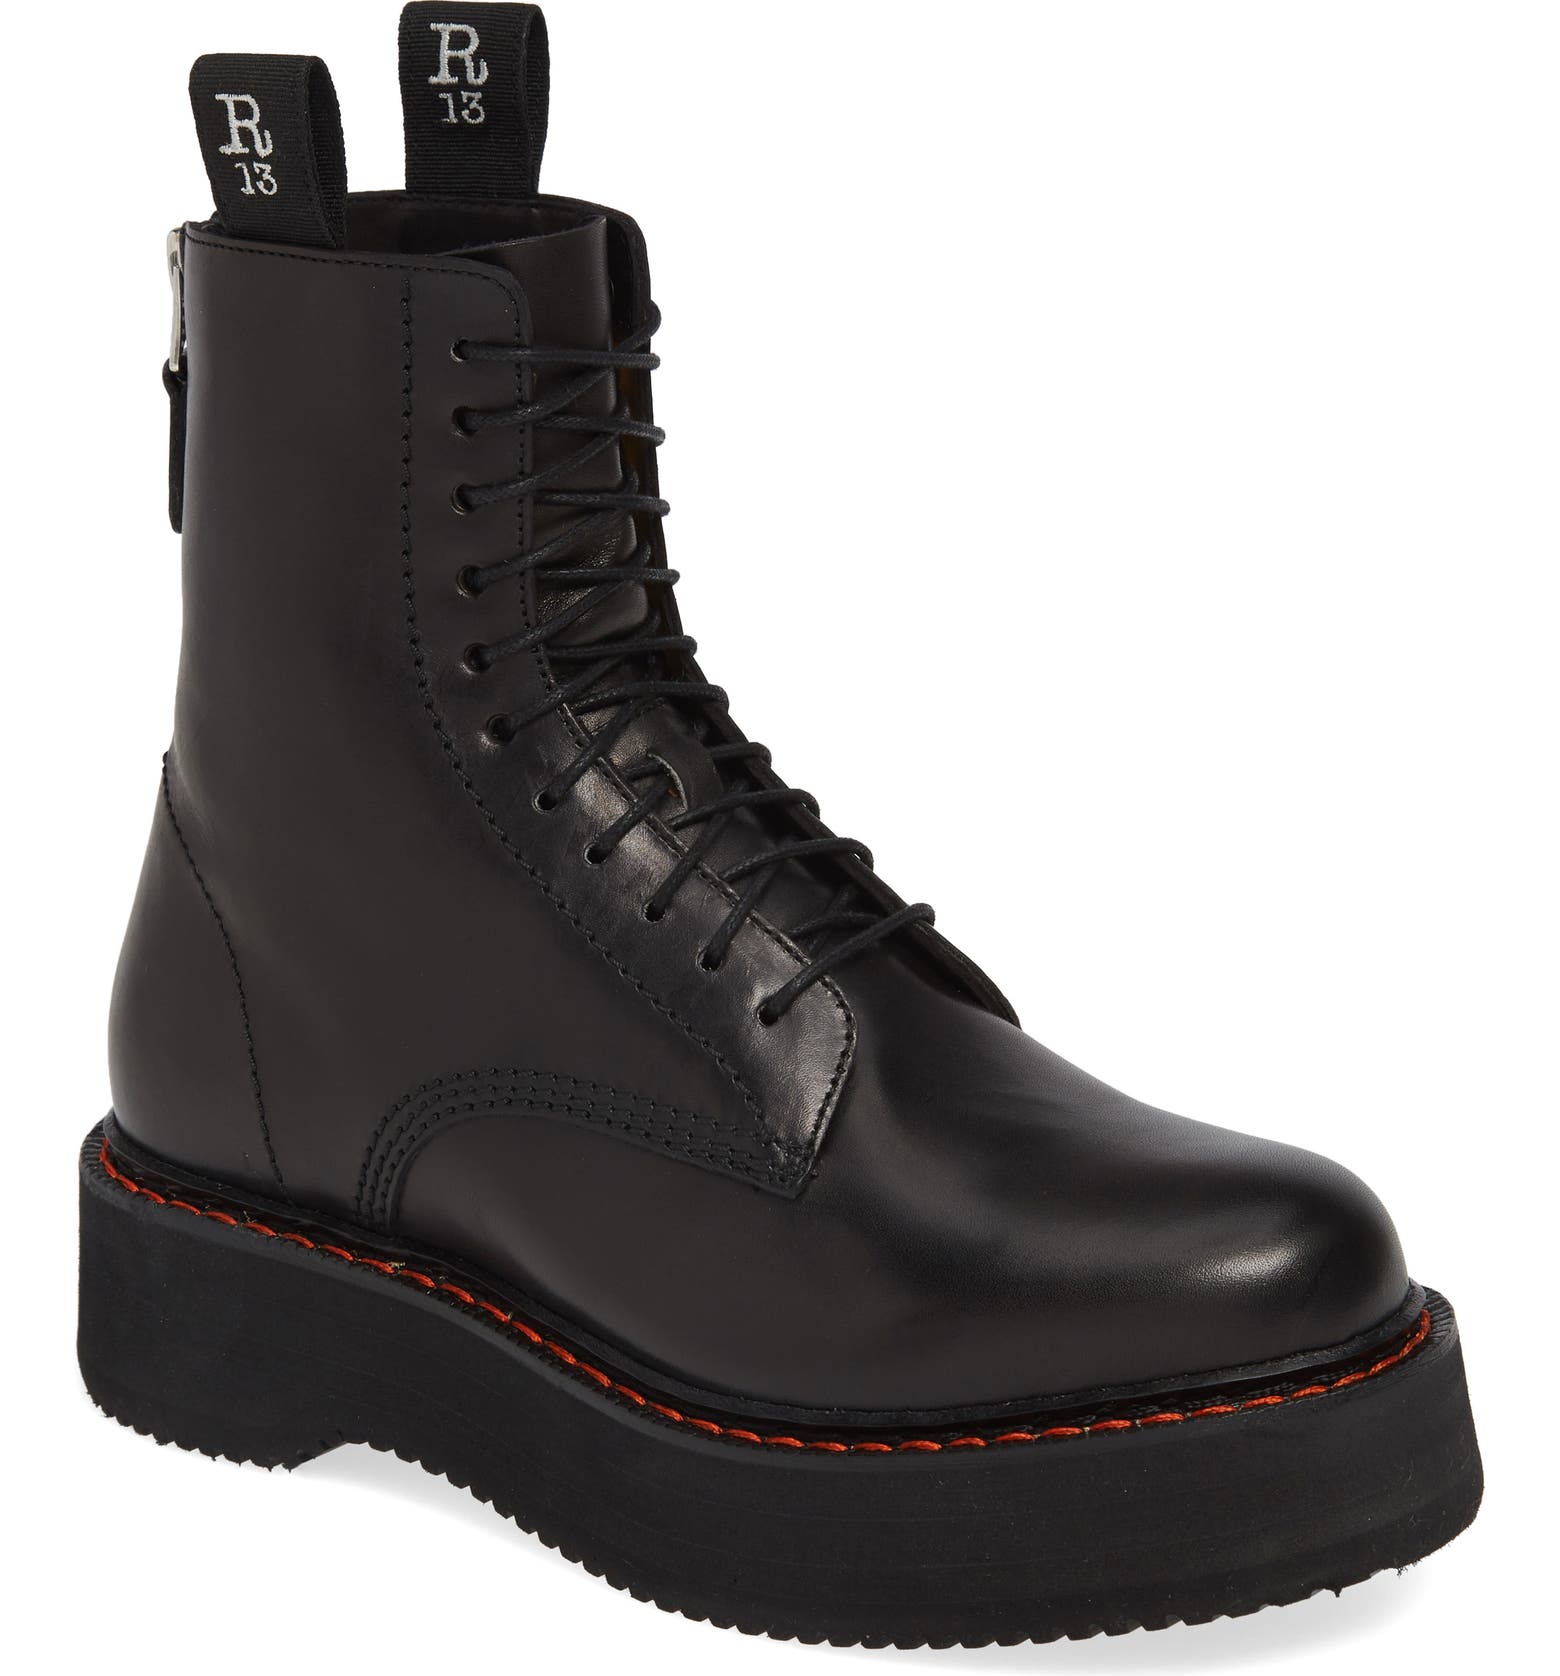 These combat boots feature R13's signature orange stitching and logo-embroidered pull tabs